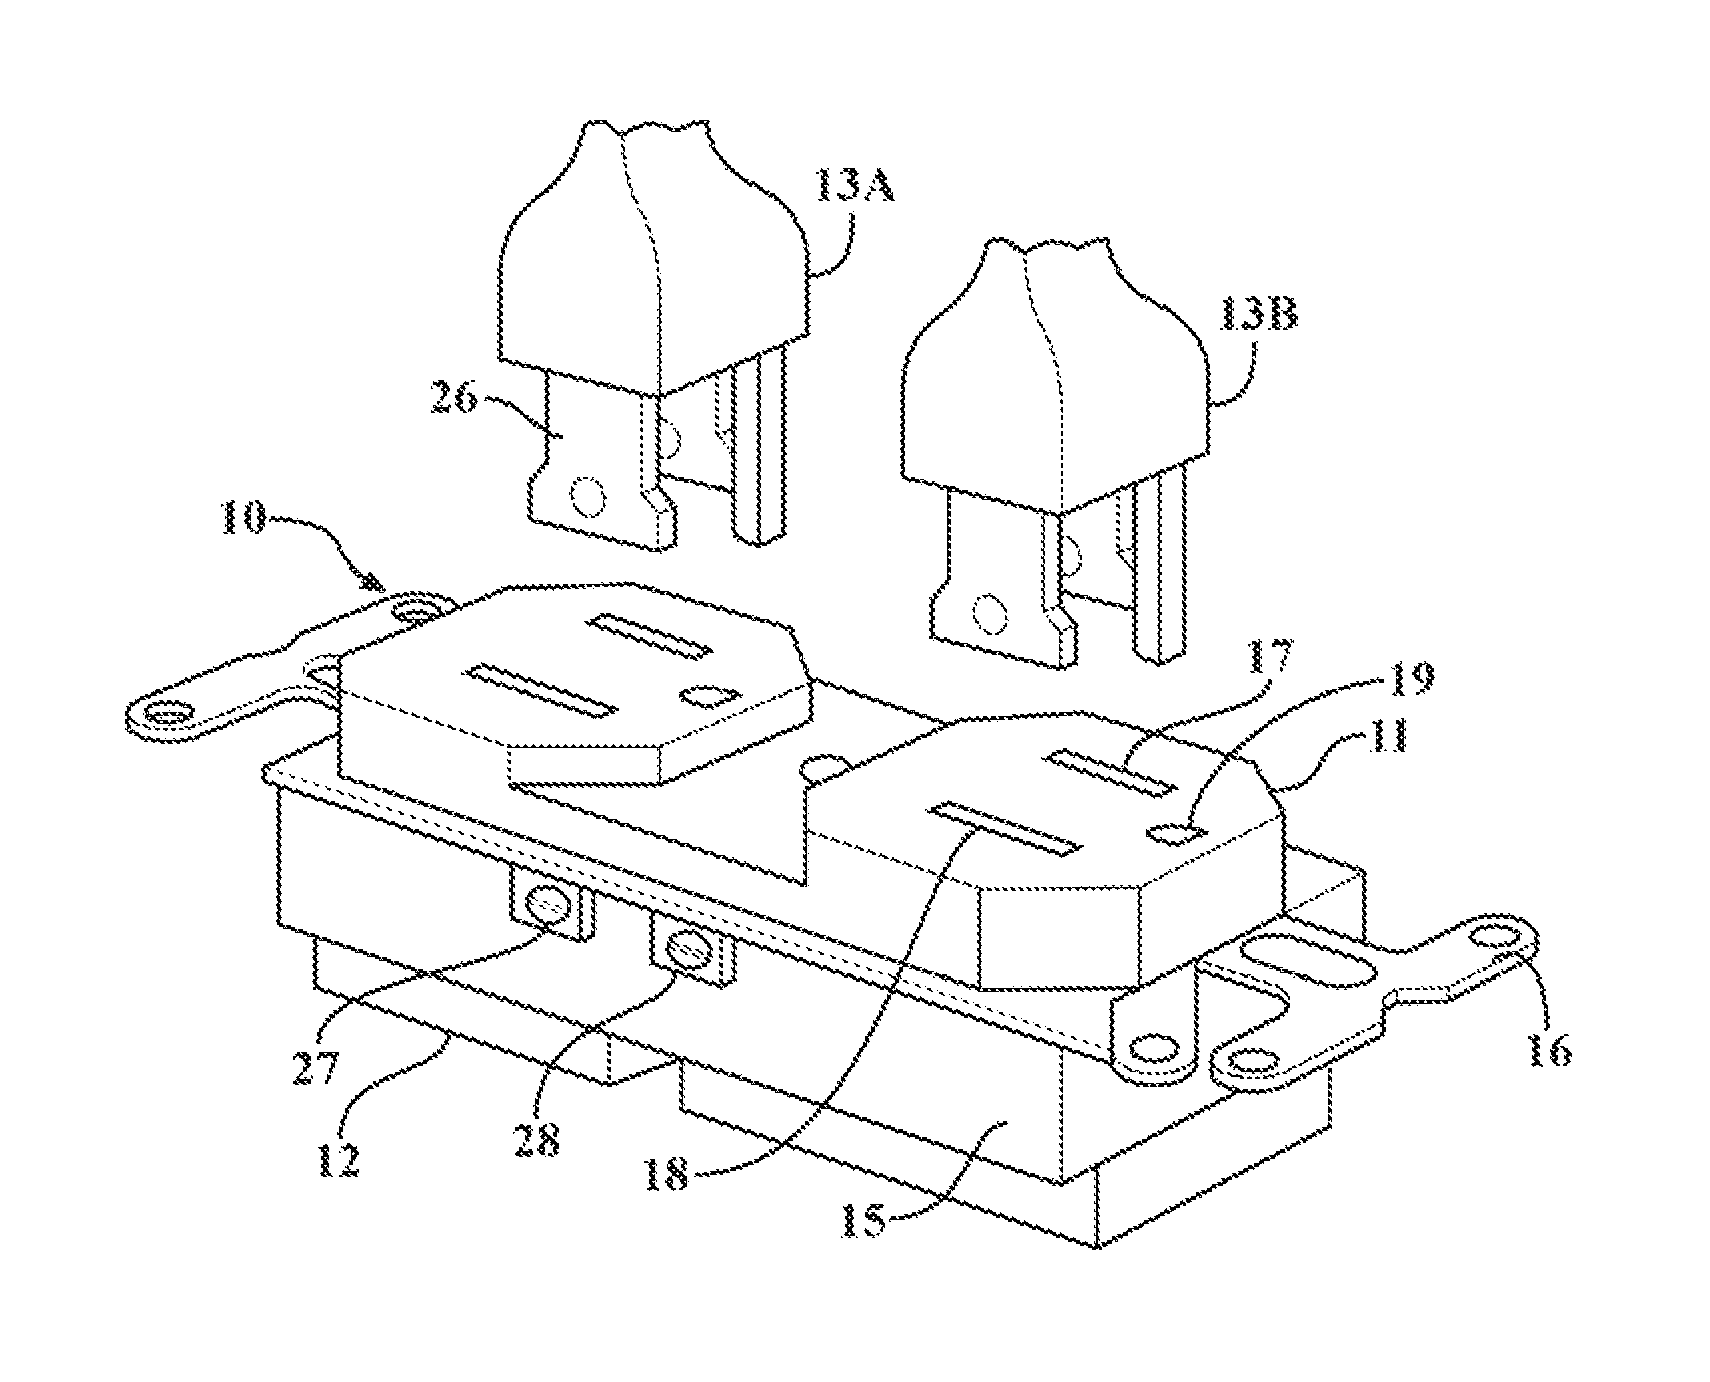 System and method for monitoring an electrical device